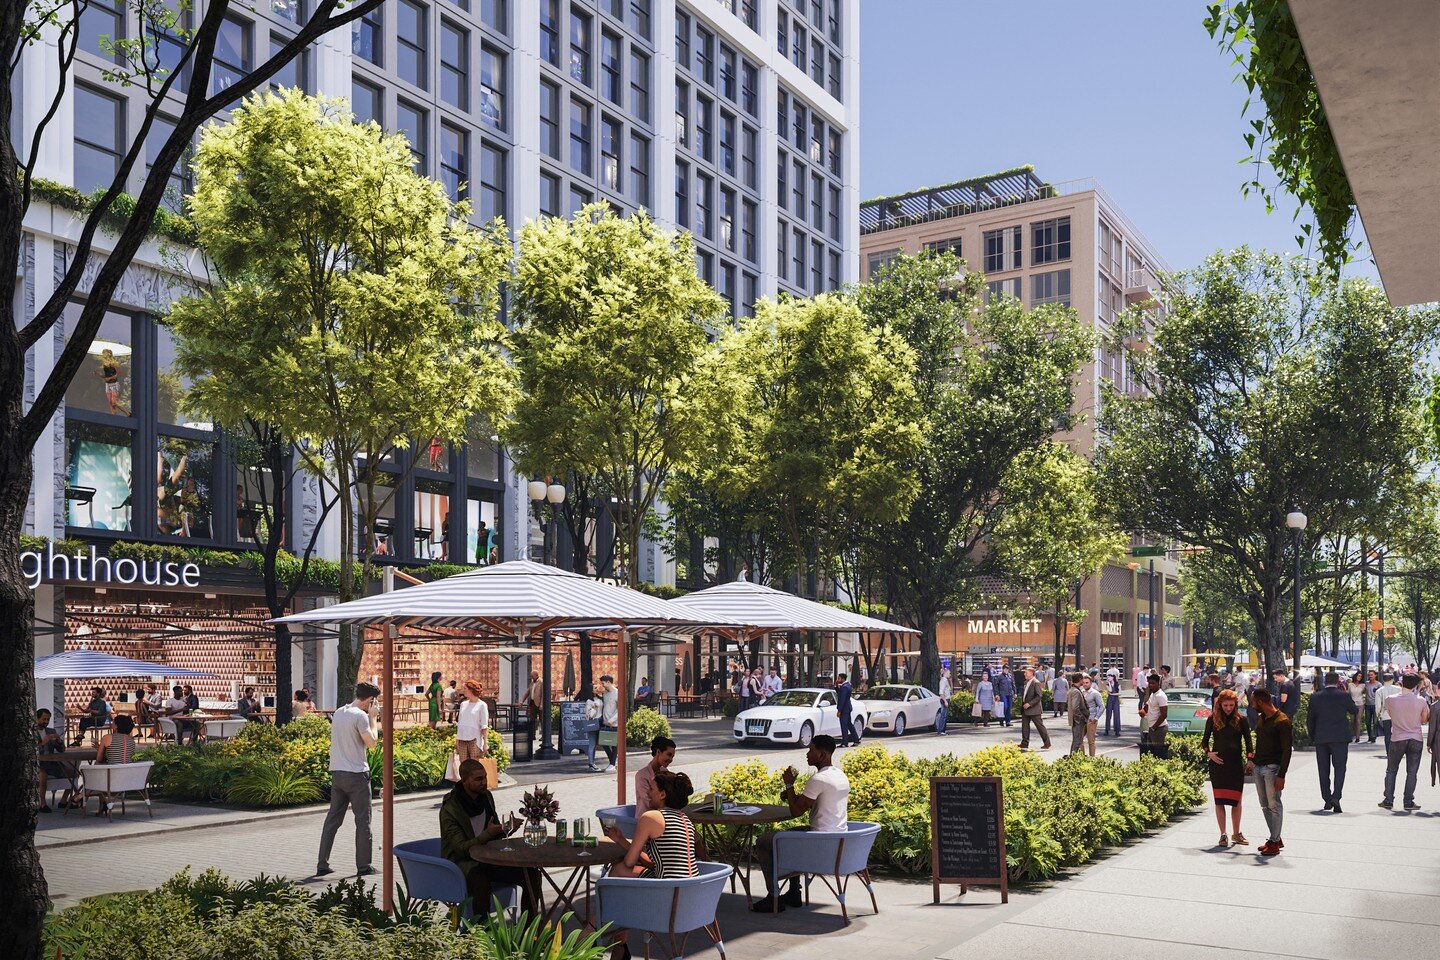 Of Place is honored to work with Gateway Jax on a transformative mixed use development project for Jacksonville, Florida's downtown core. The $500 million project, which has a total buildout of $2 billion, will create a live, work, and play neighborh